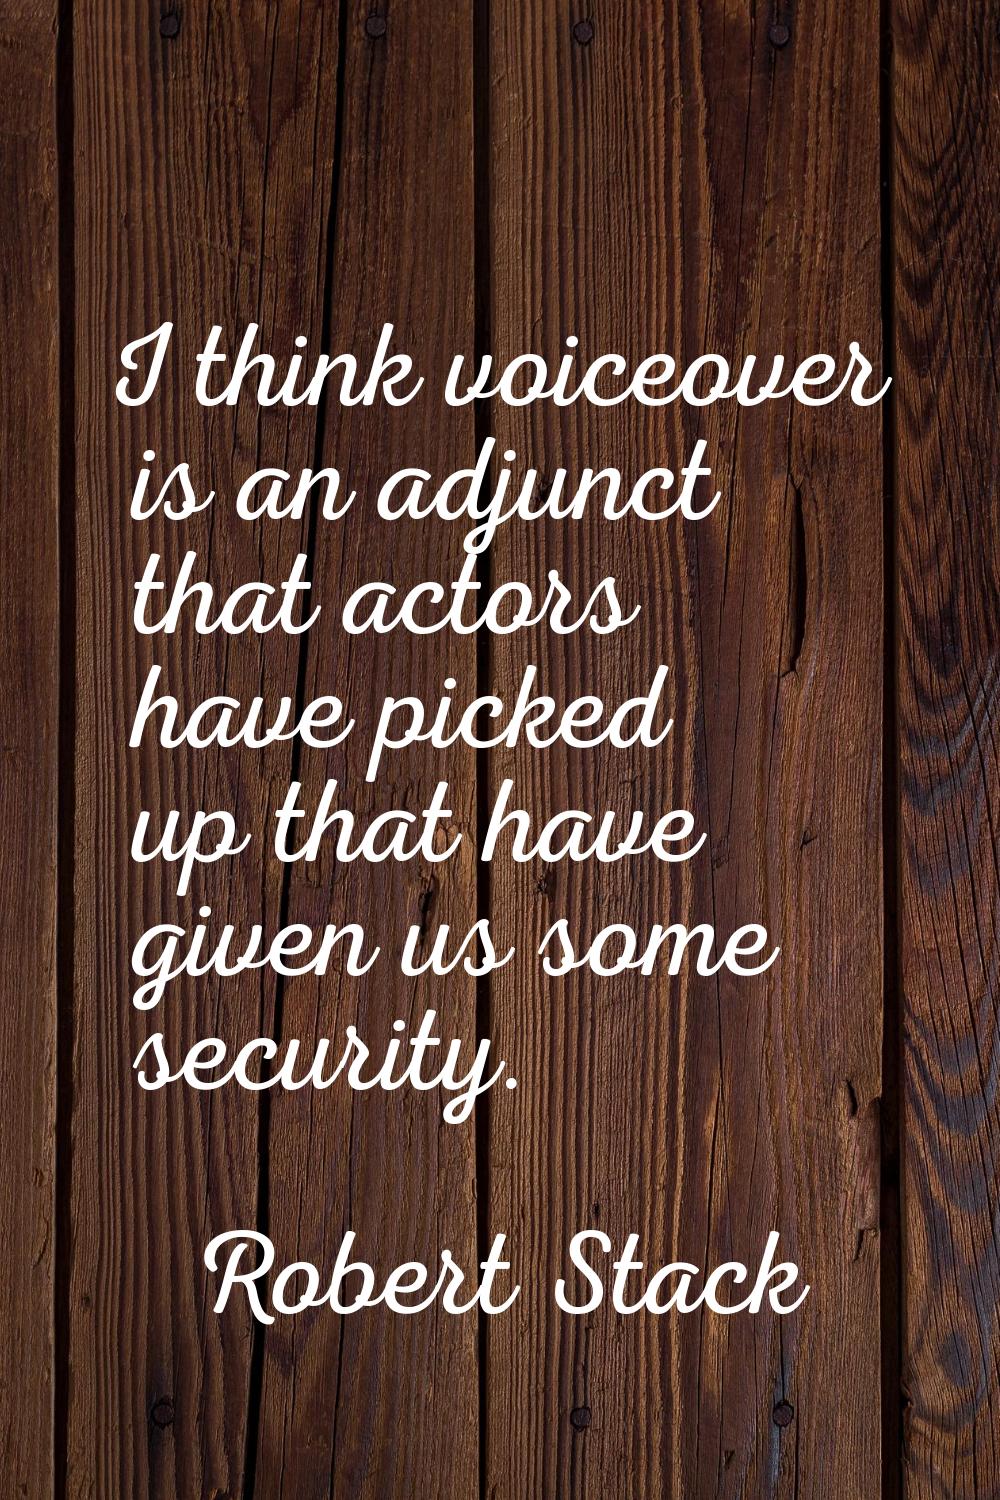 I think voiceover is an adjunct that actors have picked up that have given us some security.